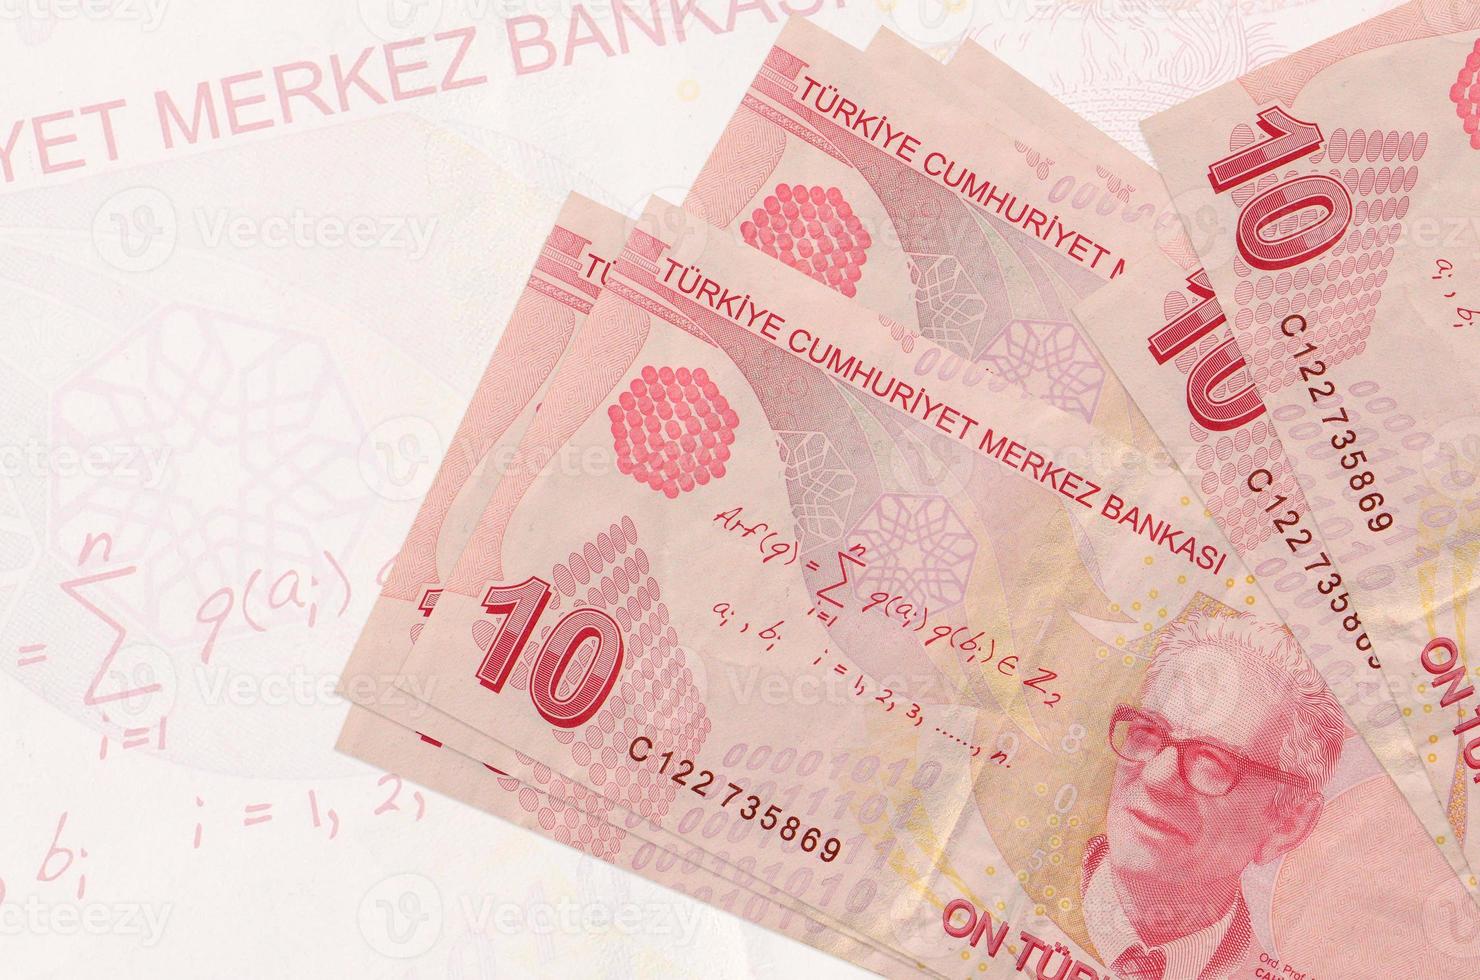 10 Turkish liras bills lies in stack on background of big semi-transparent banknote. Abstract presentation of national currency photo